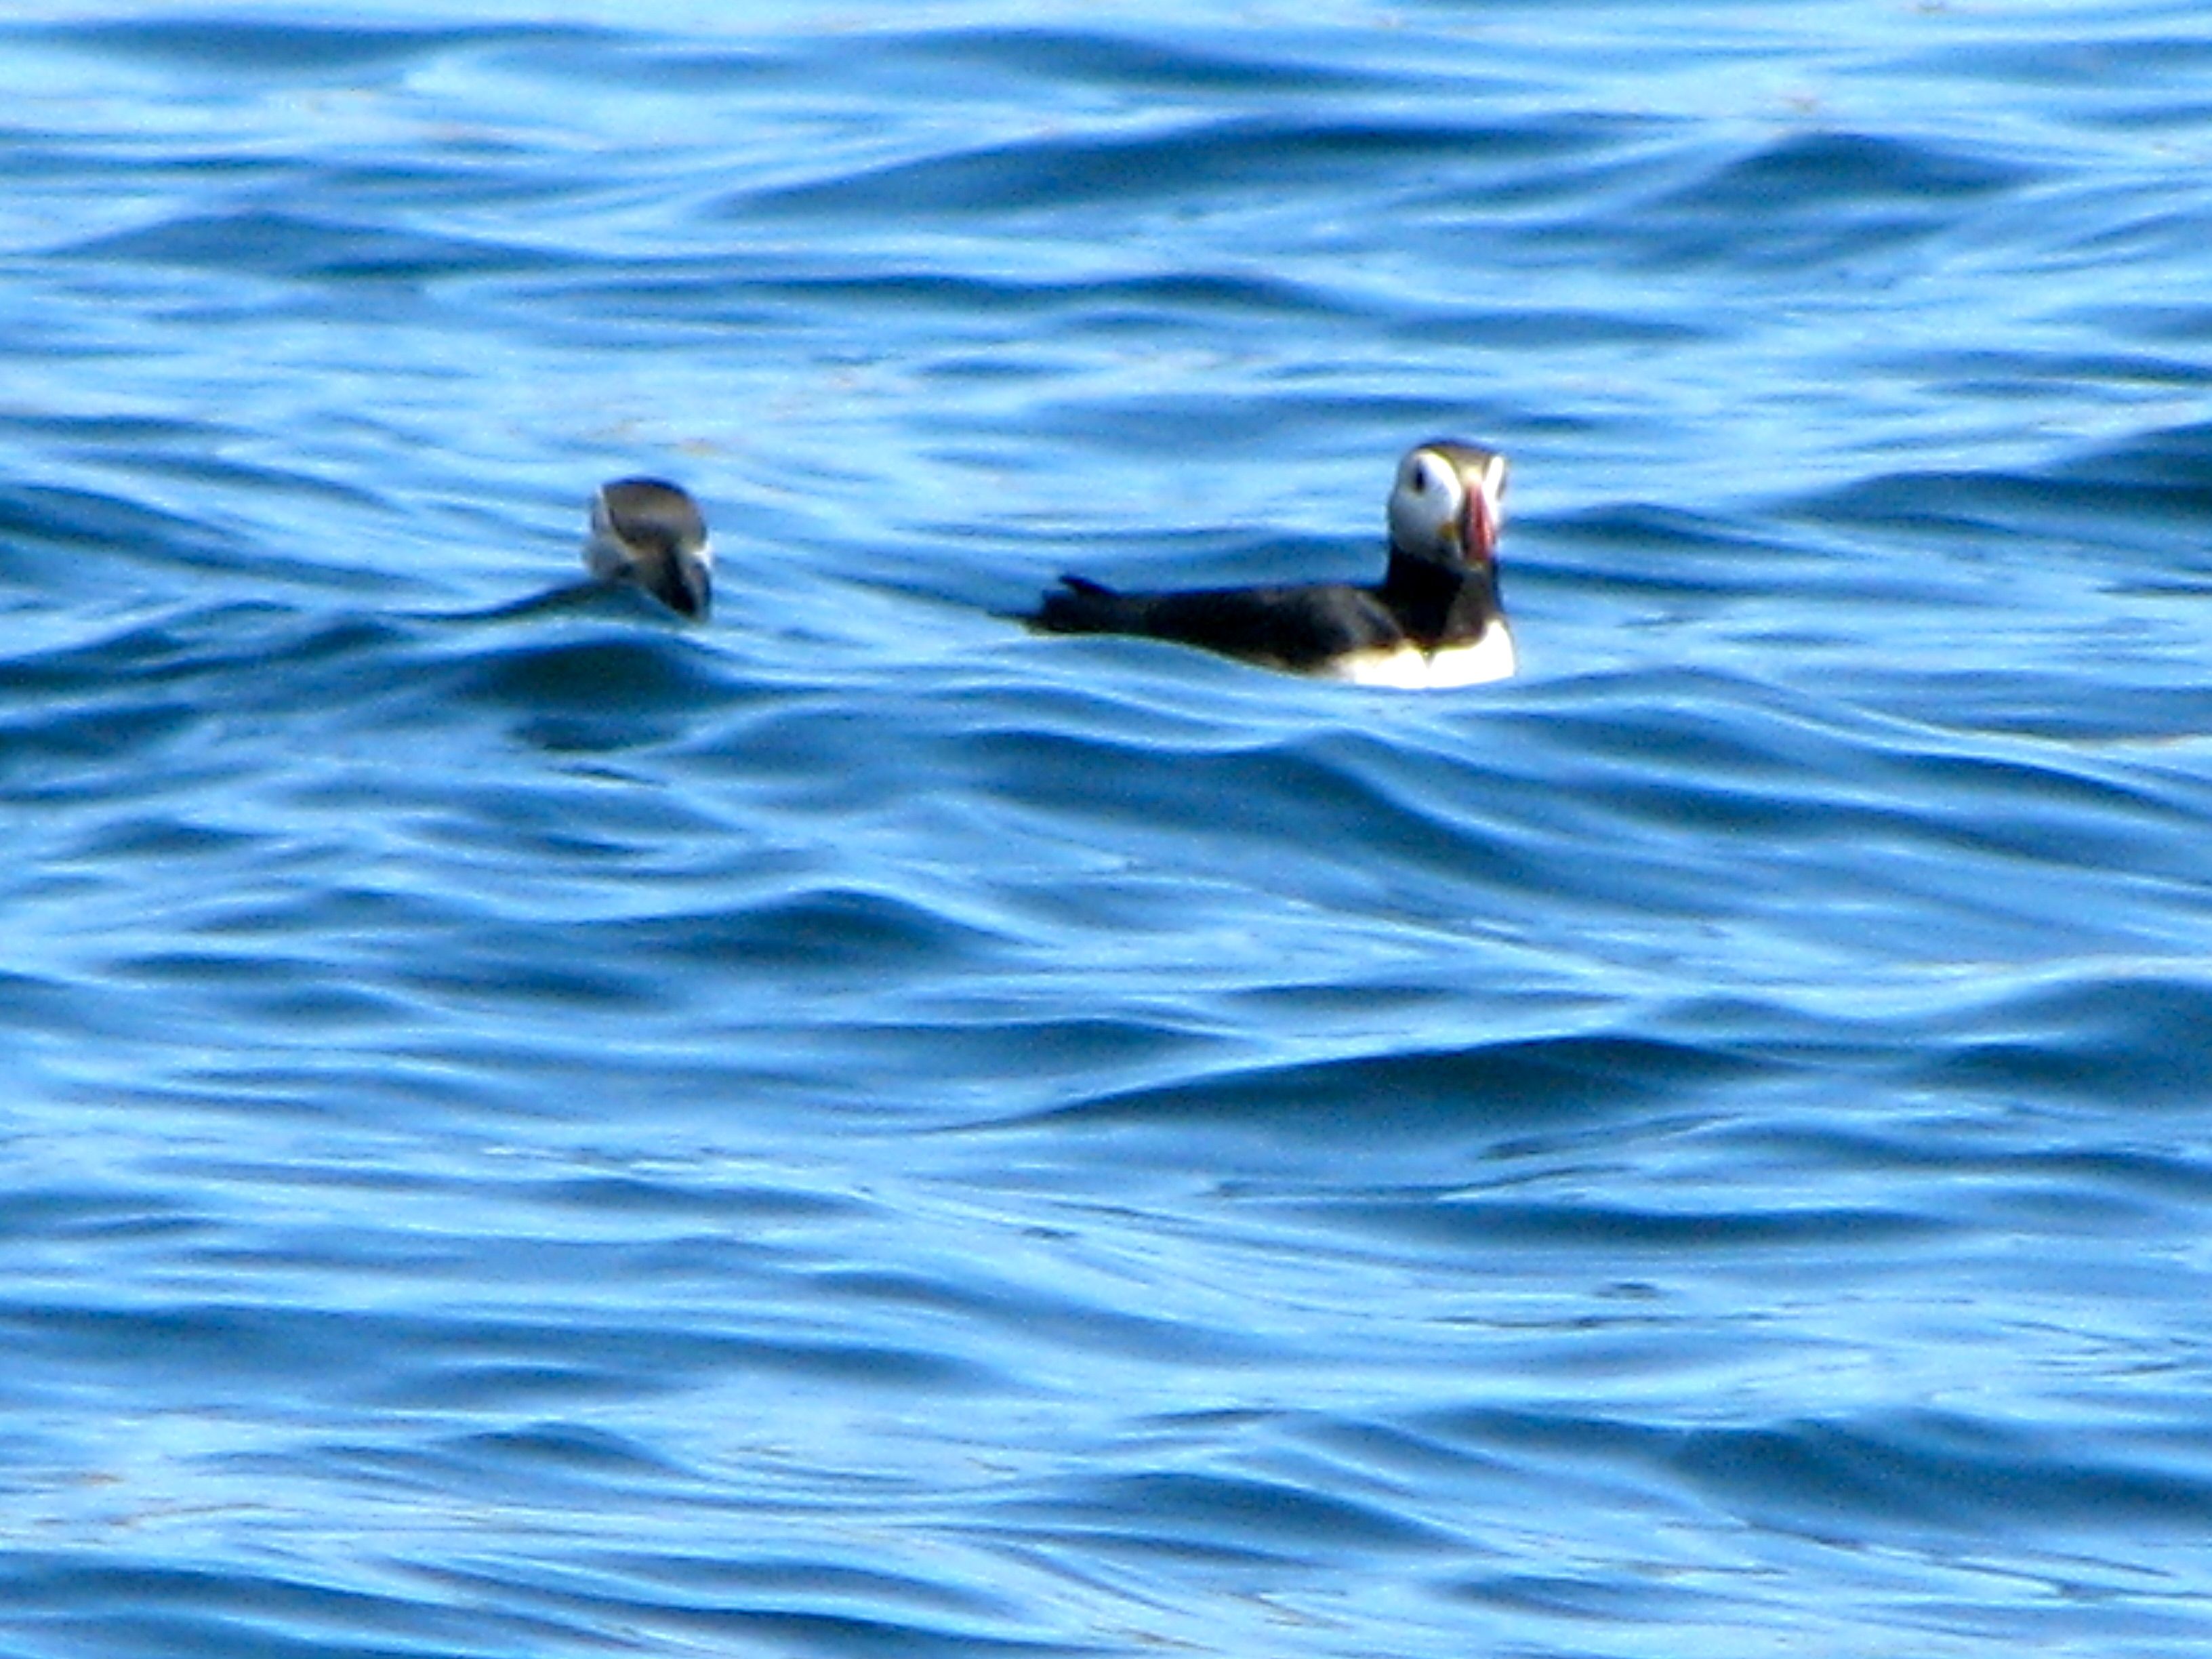 Puffins on the Ocean